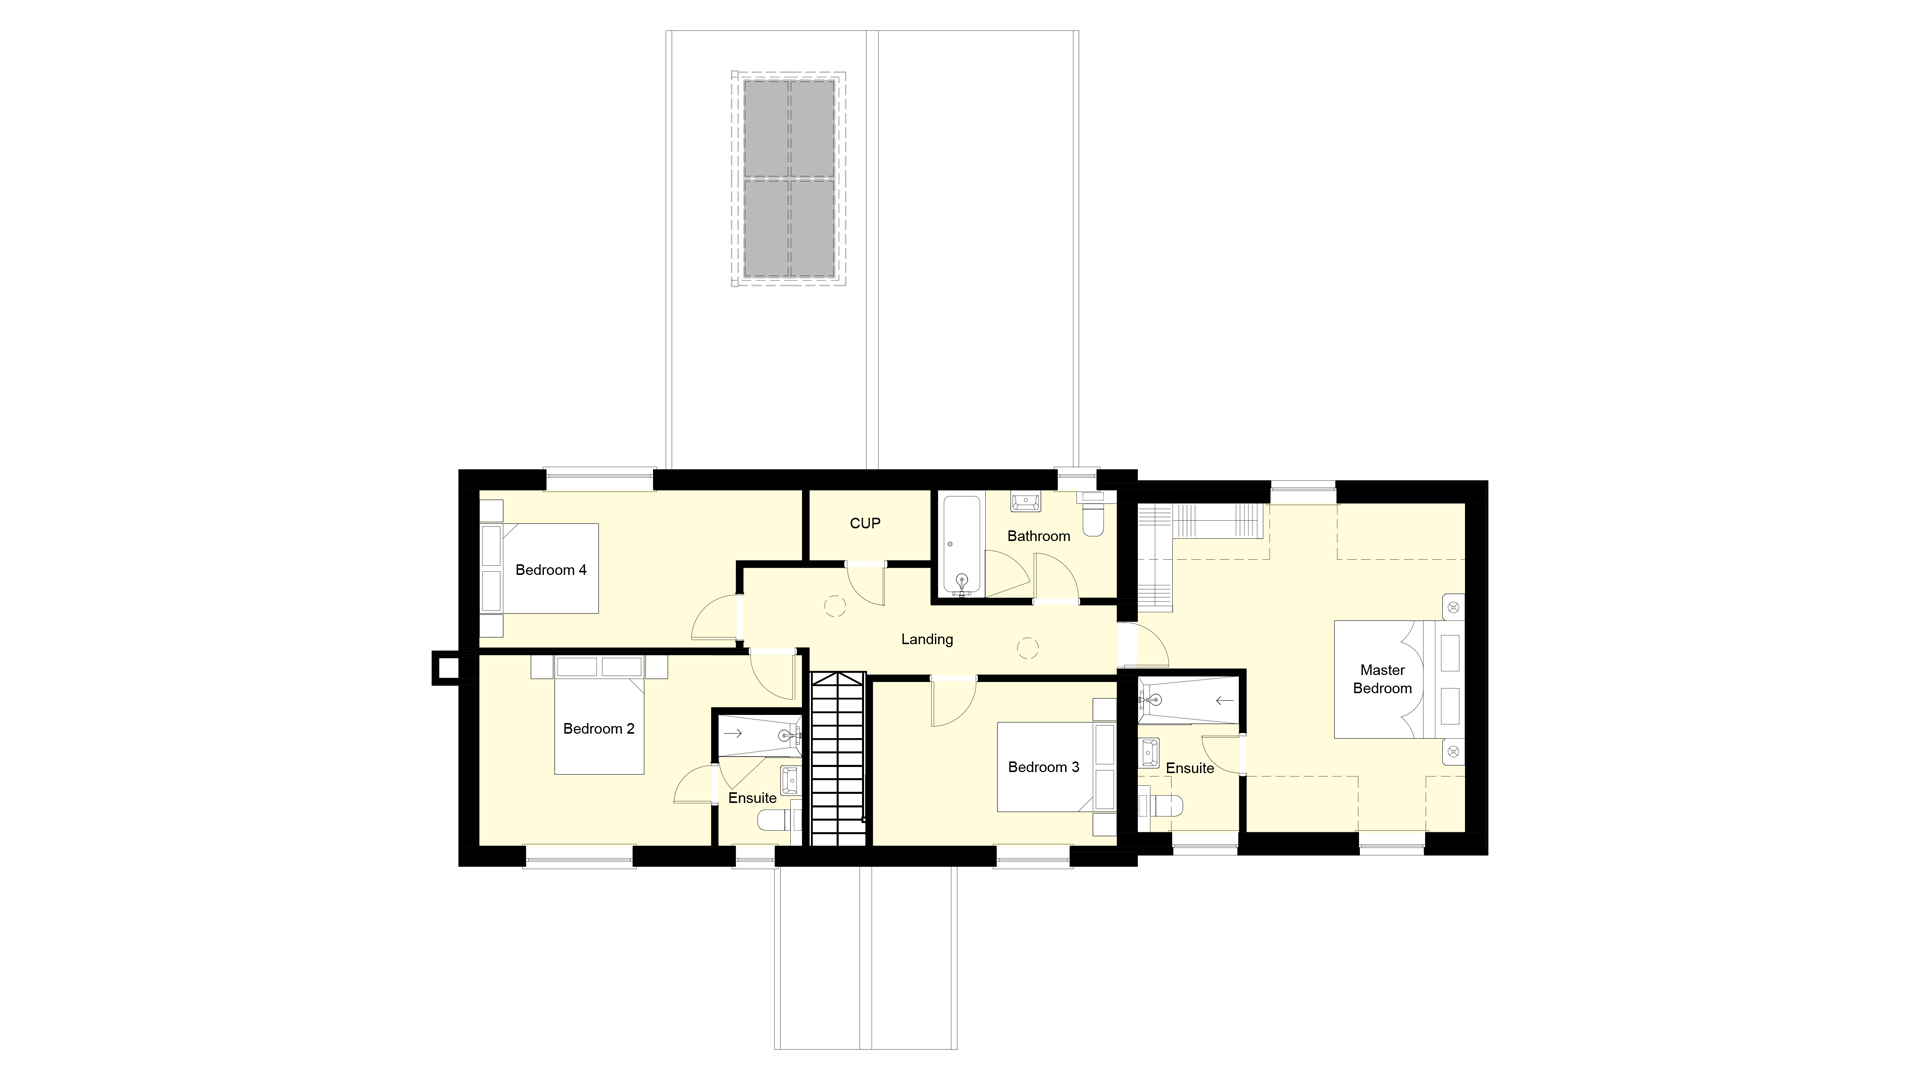 Layout of the first floor at Plot 13 Weavers park.